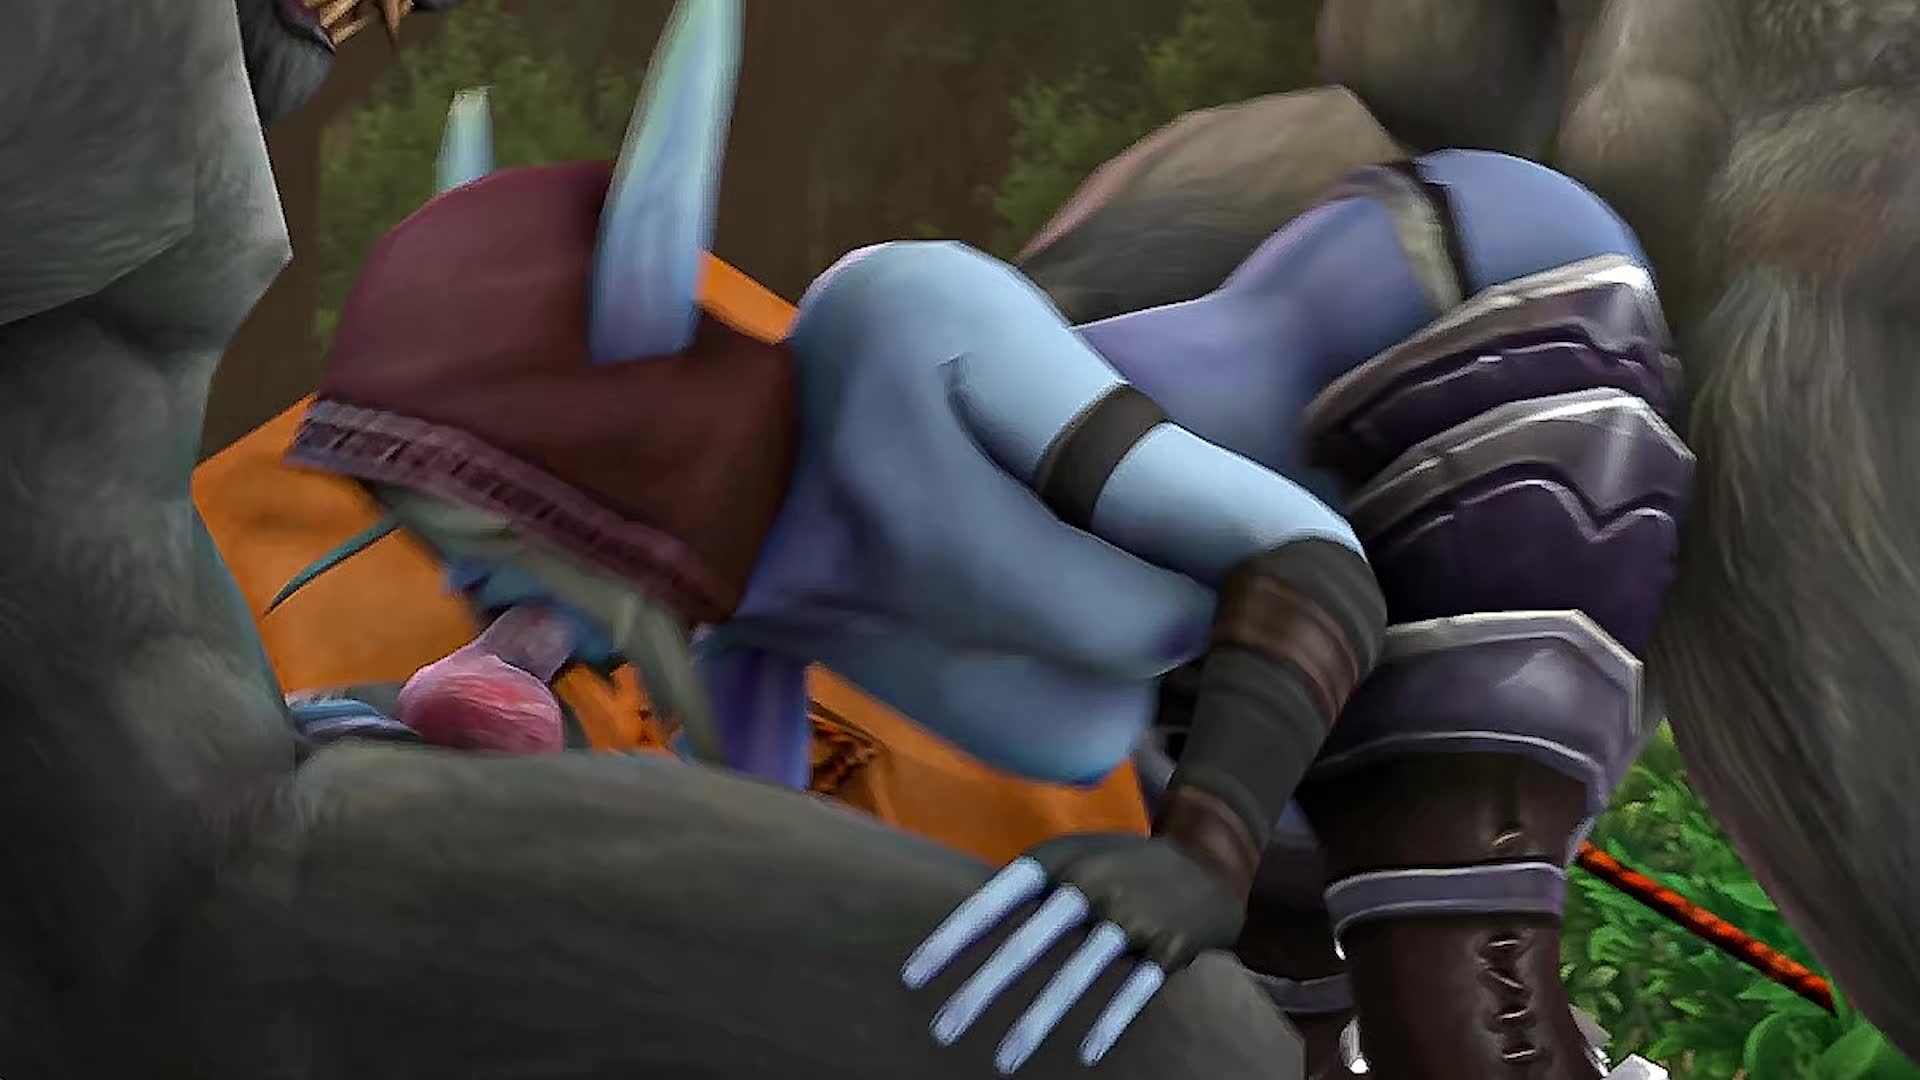 Sylvanas Windrunner Gives Deepthroat Blowjob And Gets Cock From Behind – World Of Warcraft NSFW animation thumbnail